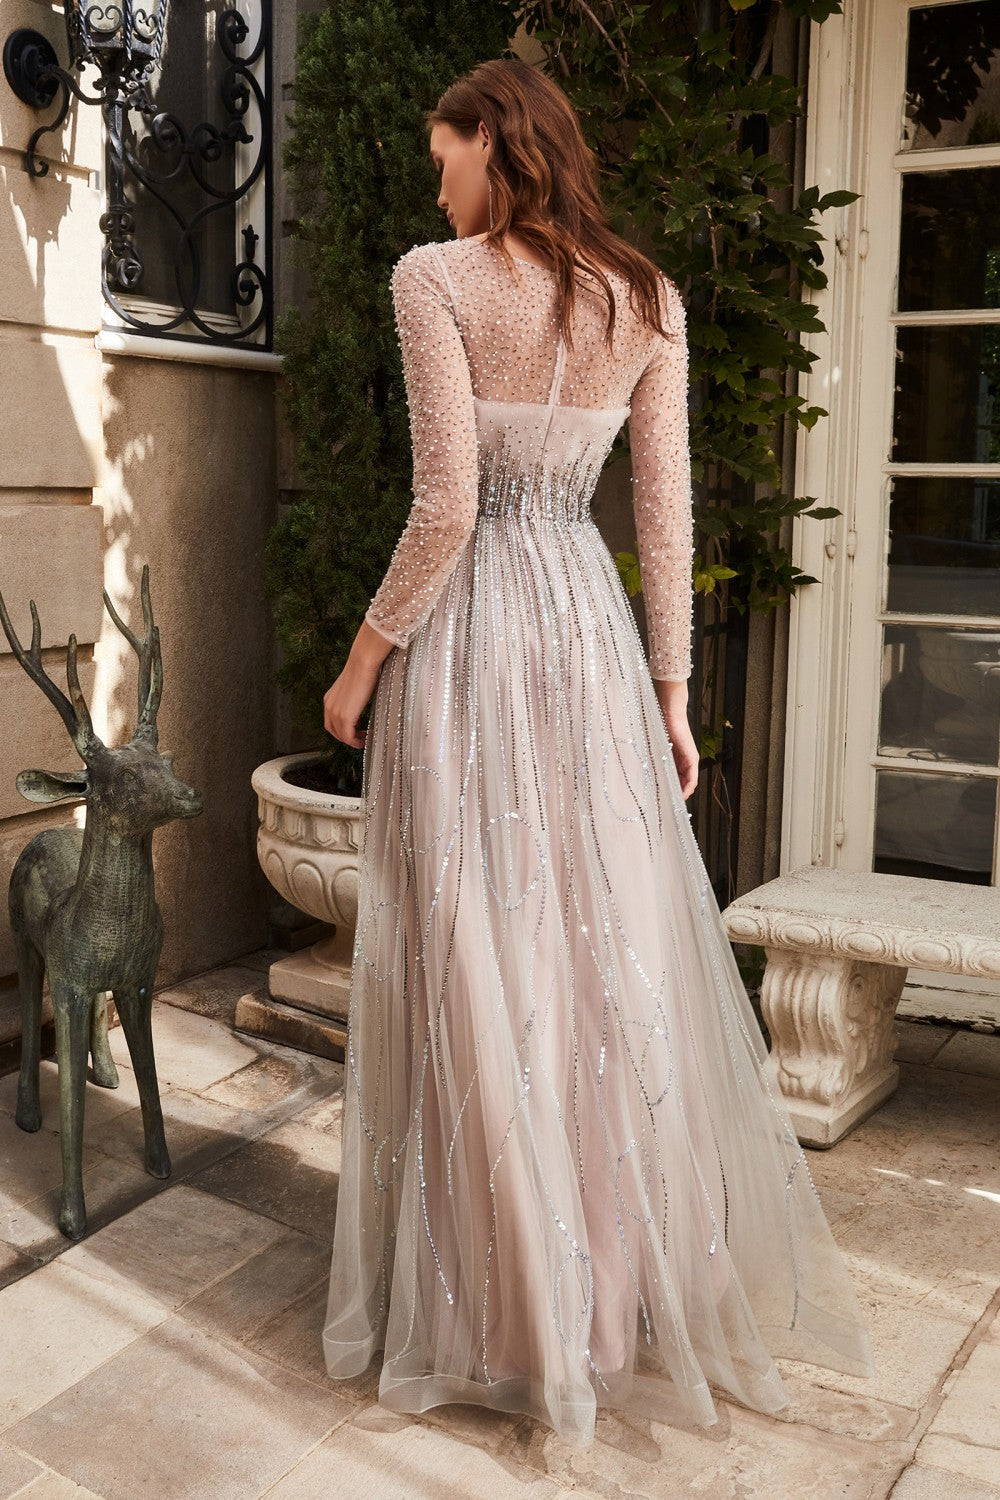 Long Sleeve A-Line Prom & Bridesmaid Charming gown Modest Sequin Evening Gala Formal Shimmer Dress Appliqué Boat Neck Bodice CDB701-2